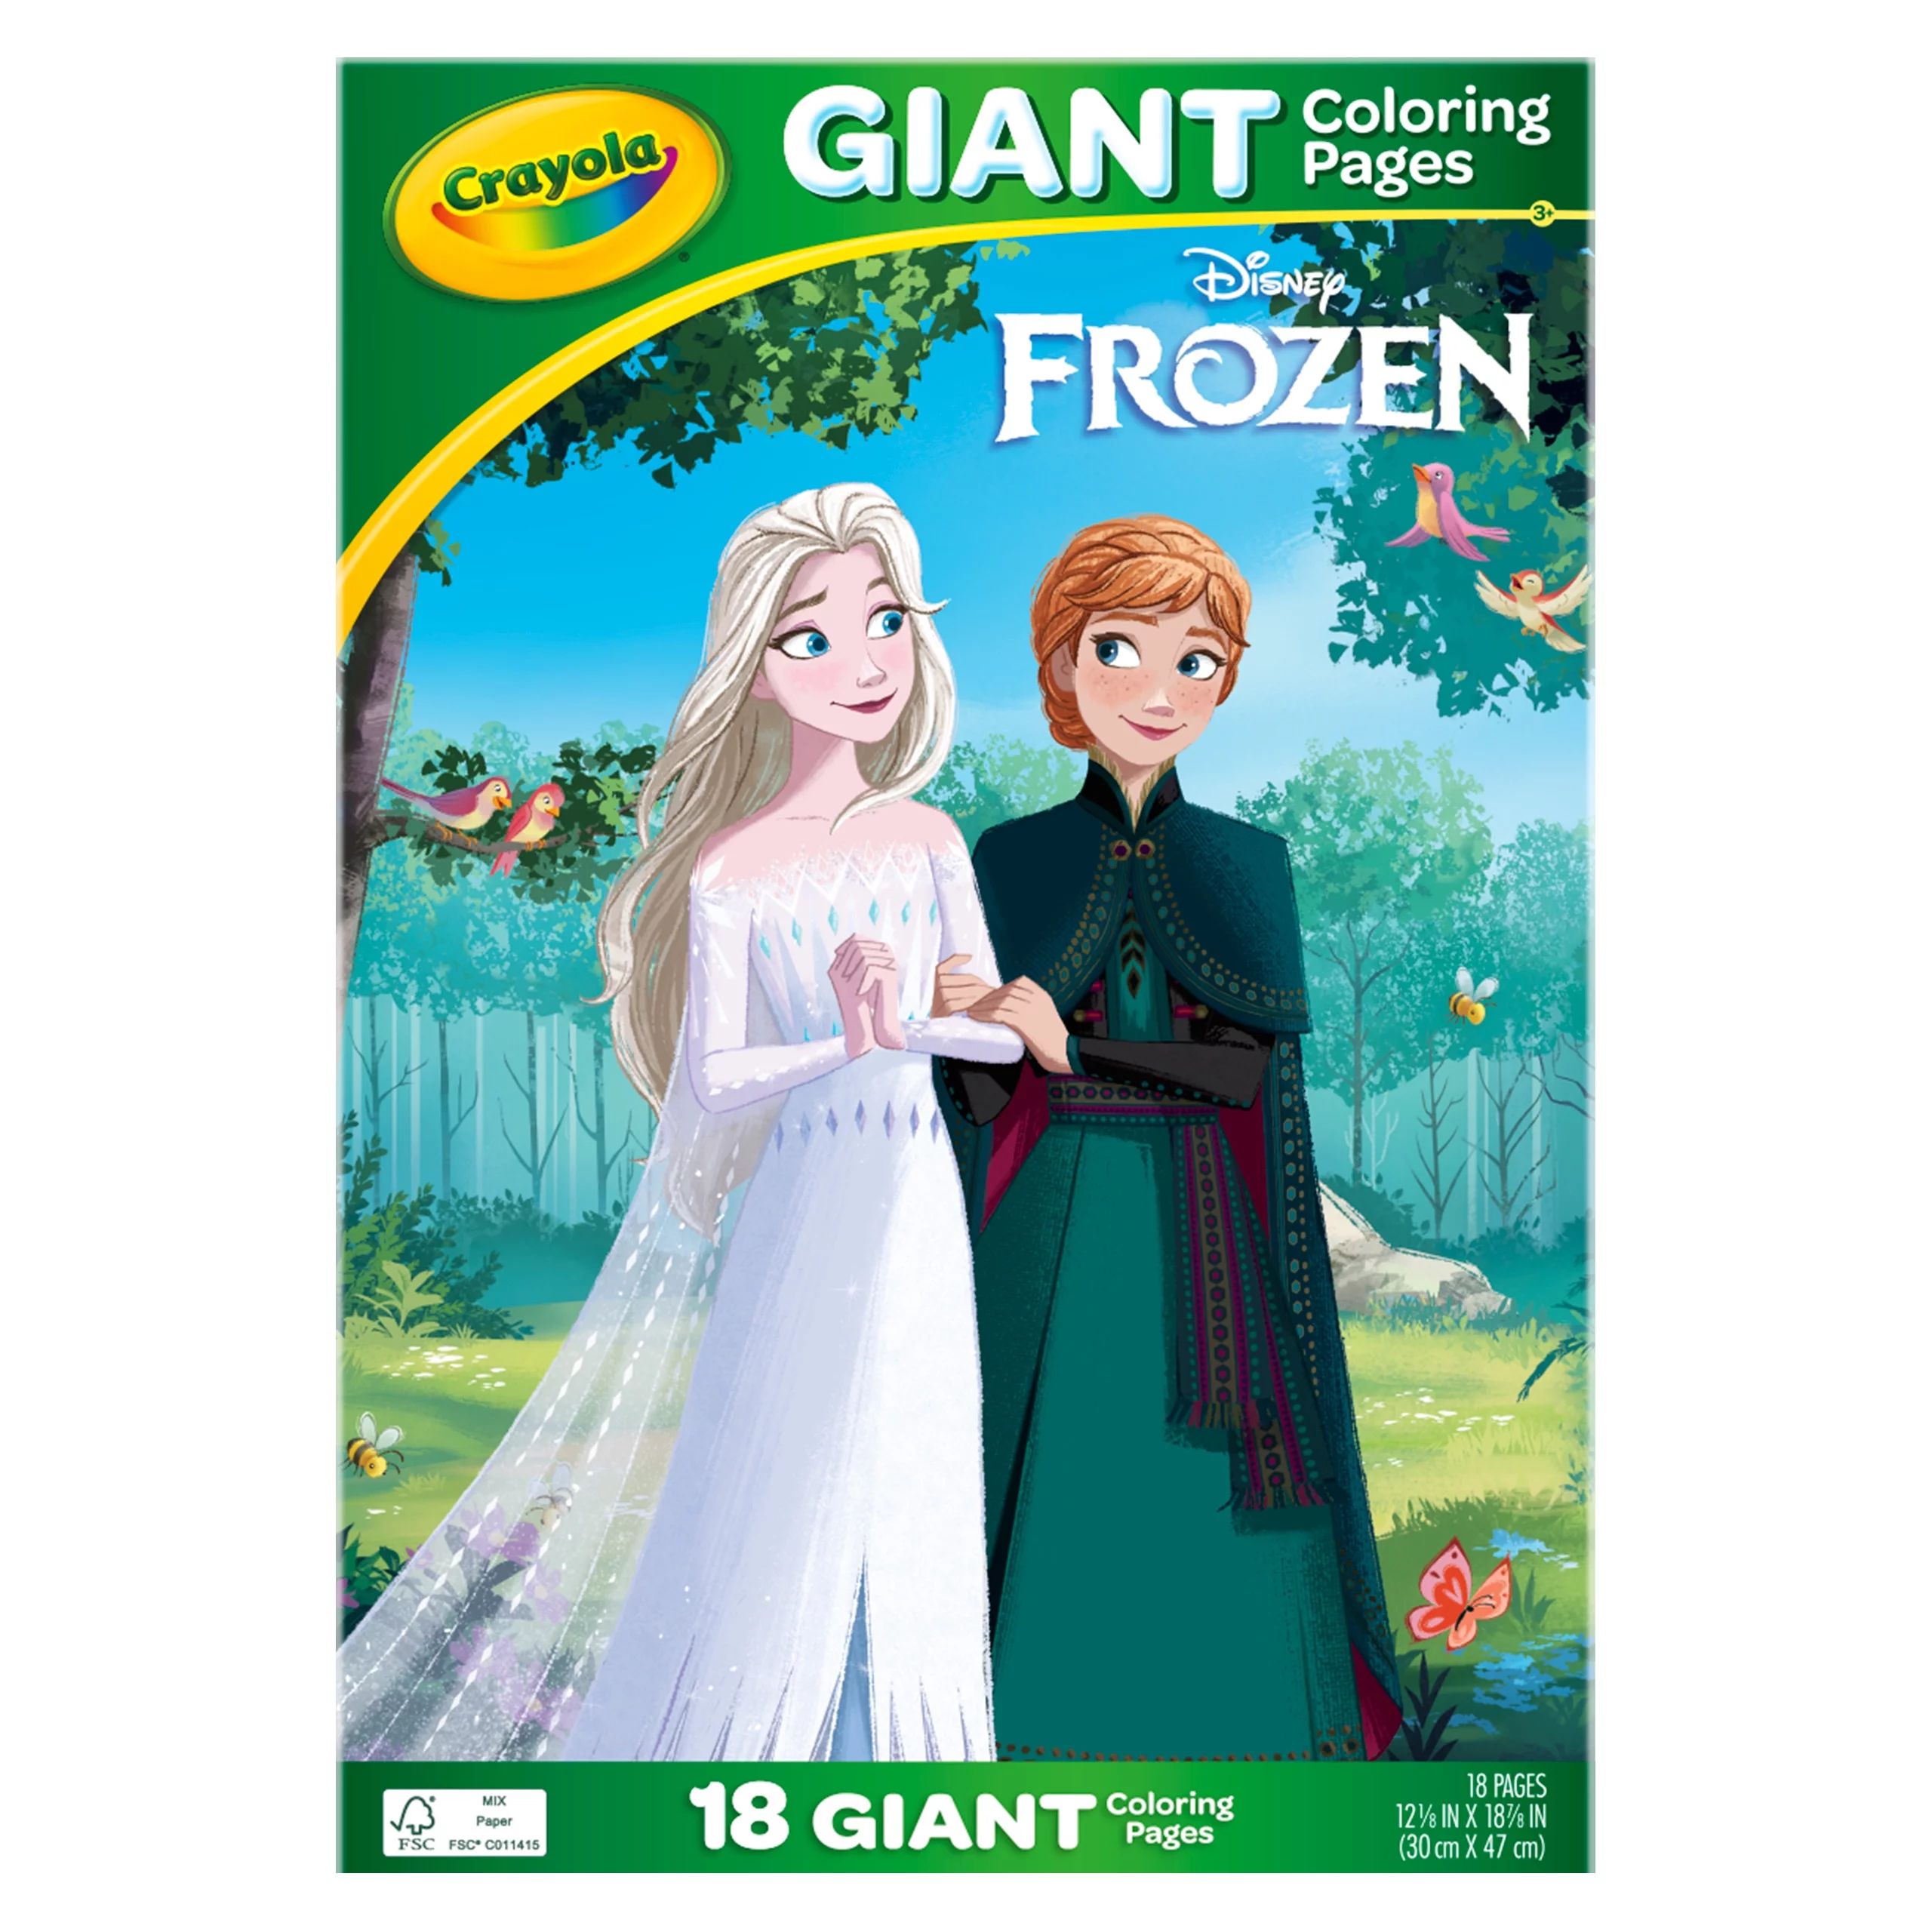 Crayola Frozen Giant Coloring Pages, 18 Coloring Pages, Gift for Kids | Walmart (US)